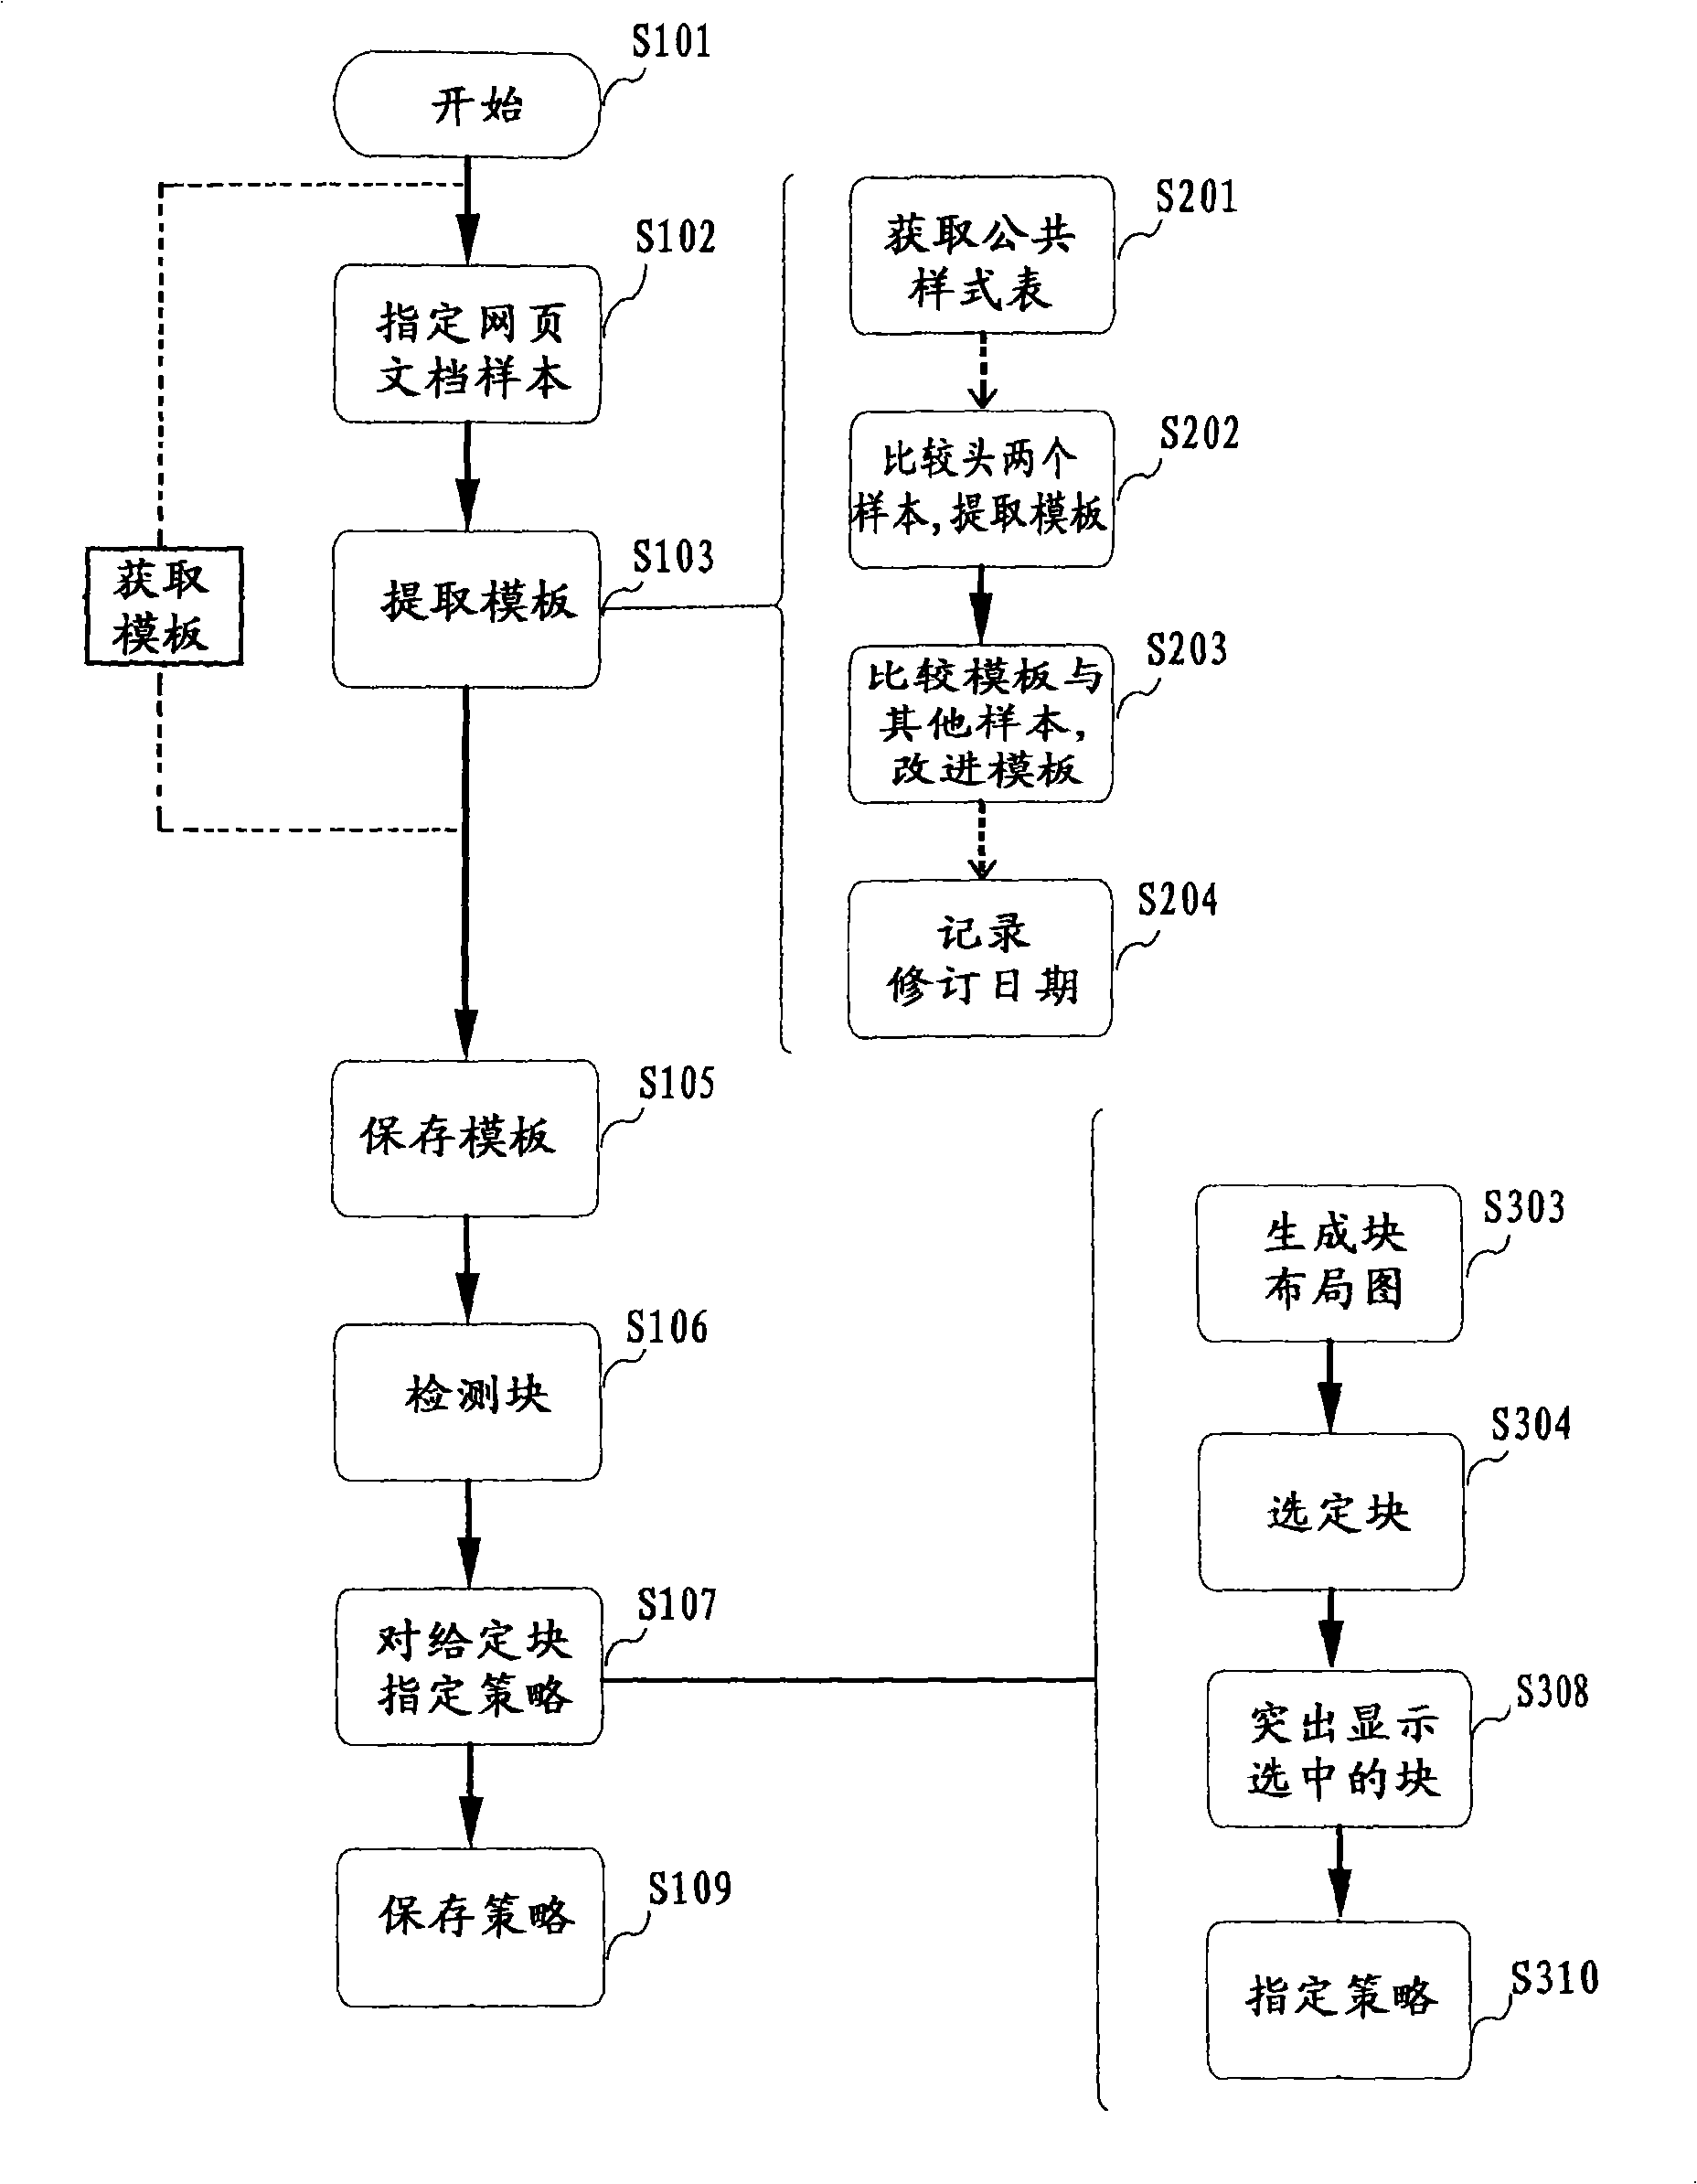 Apparatus and method for optimizing and differencing web page browsing